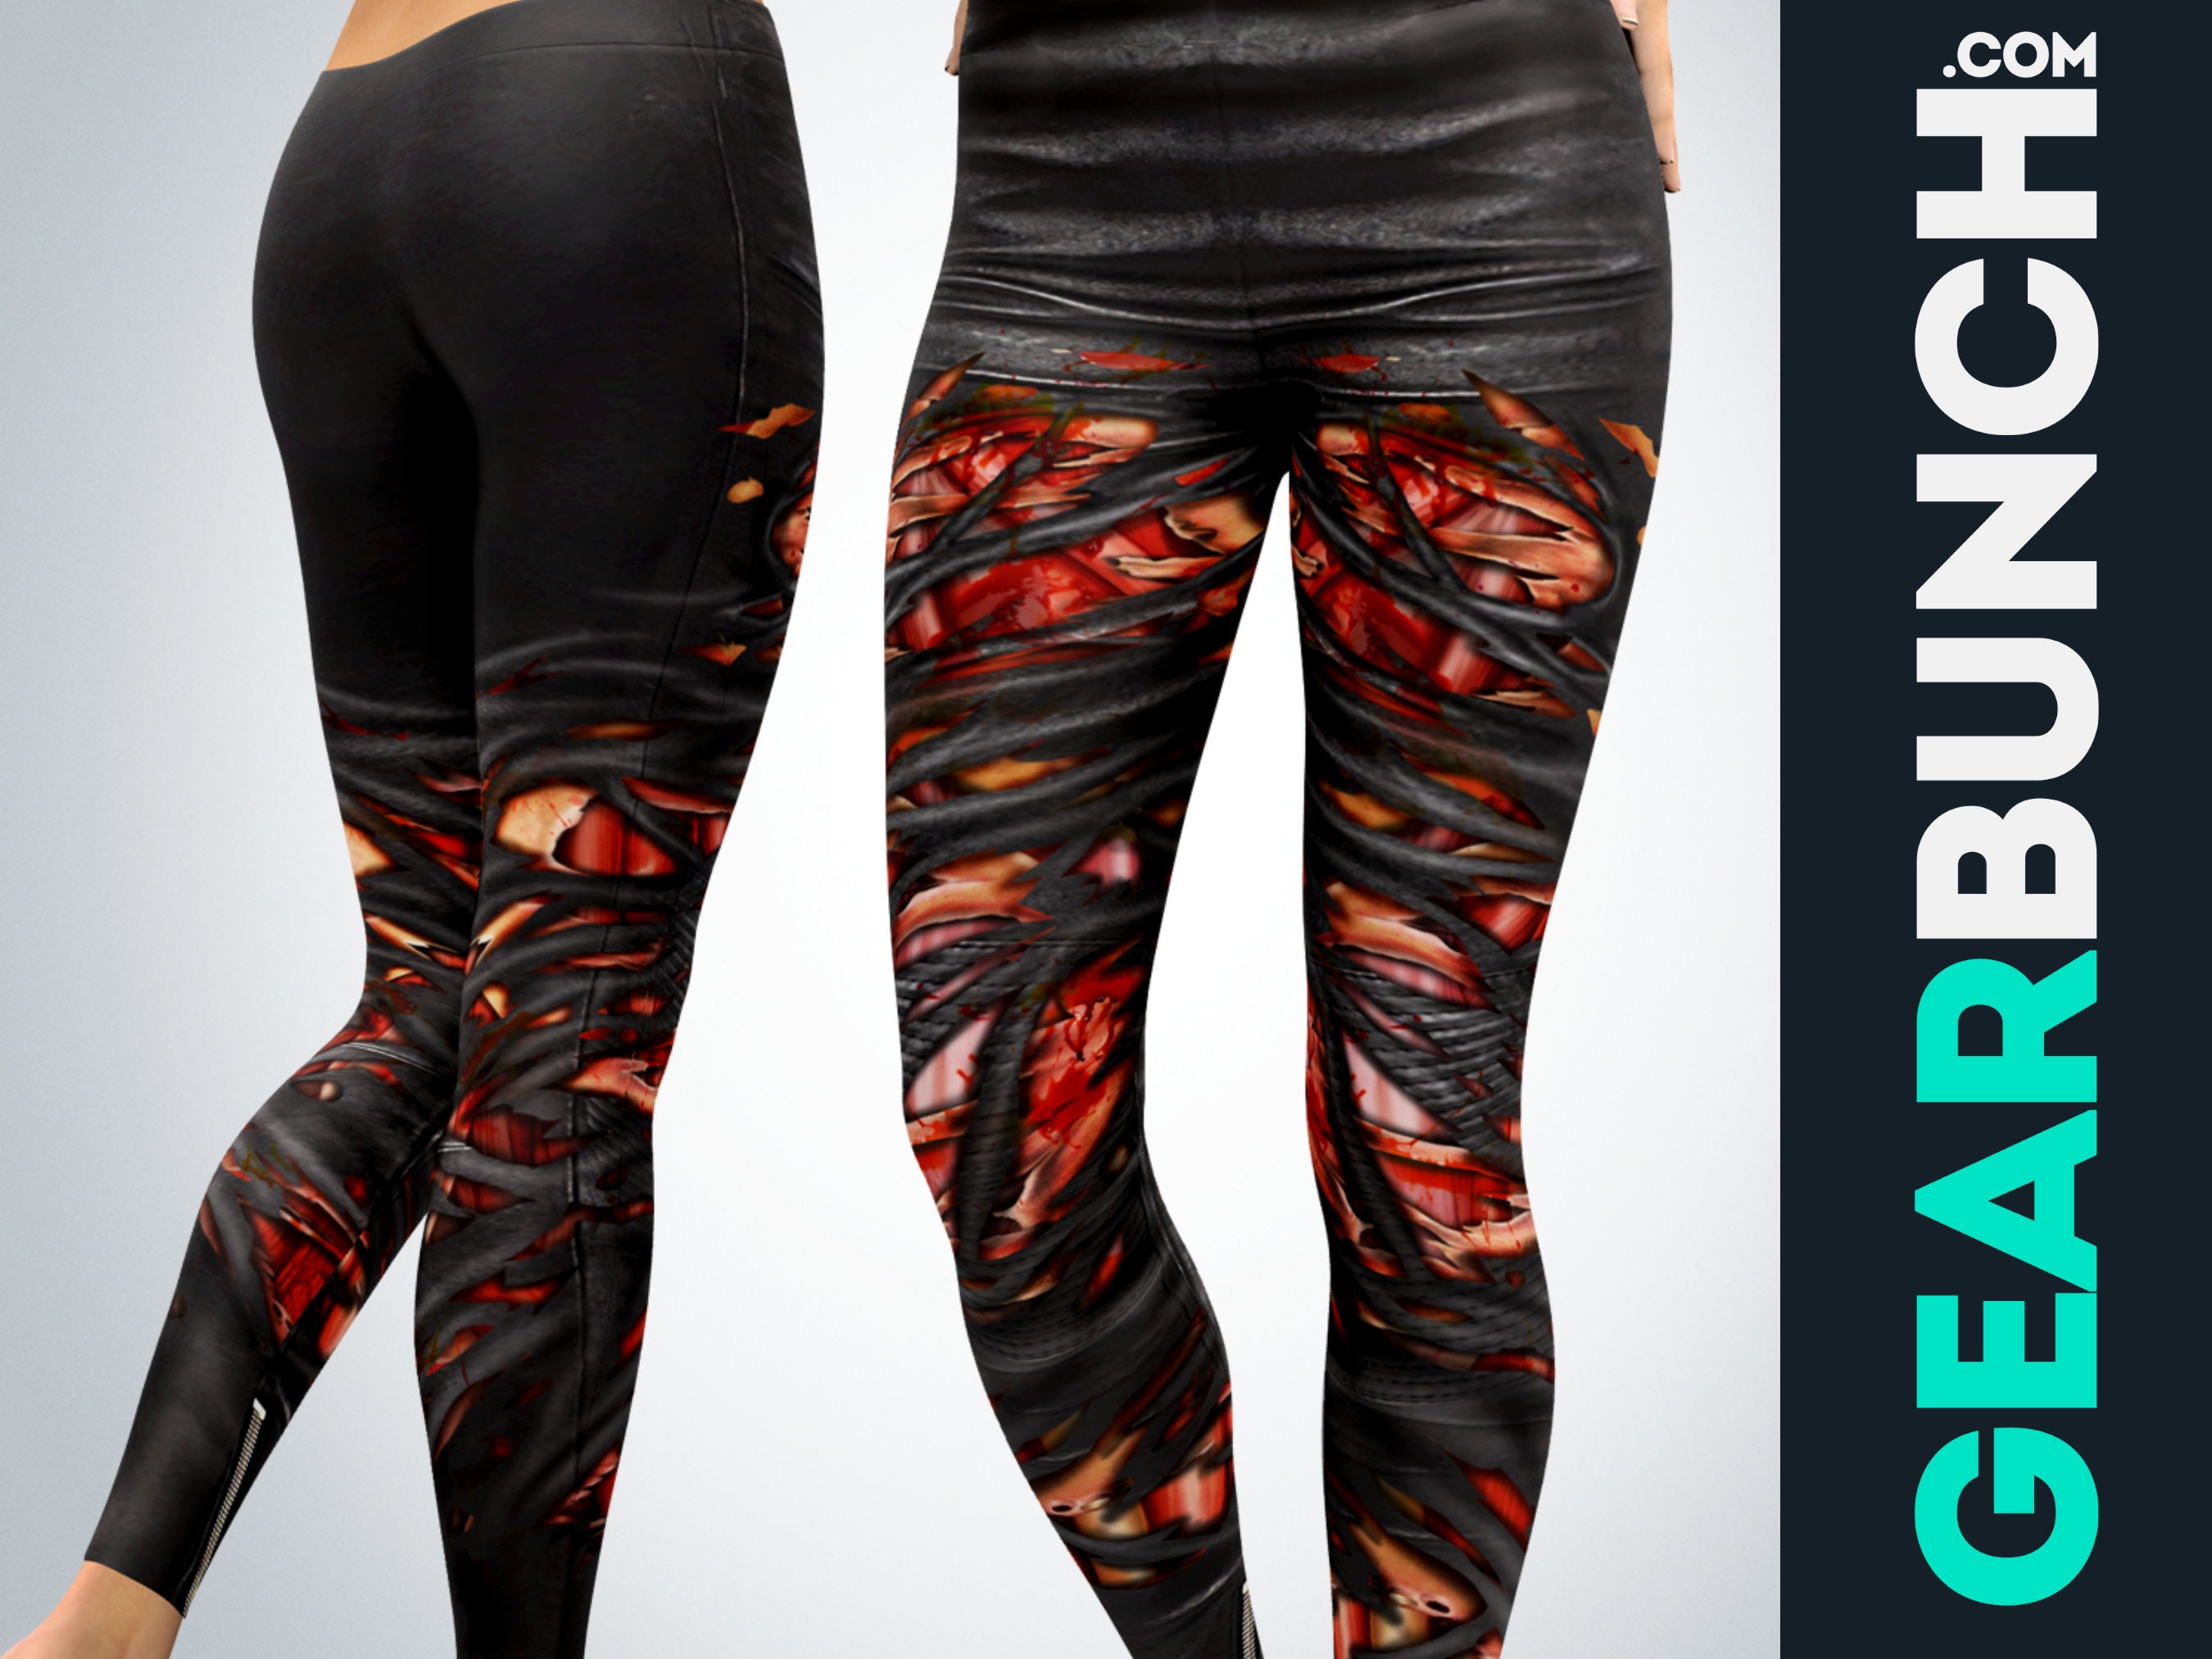 12 yoga pants that you can buy online right now (starting Rs 1,300)